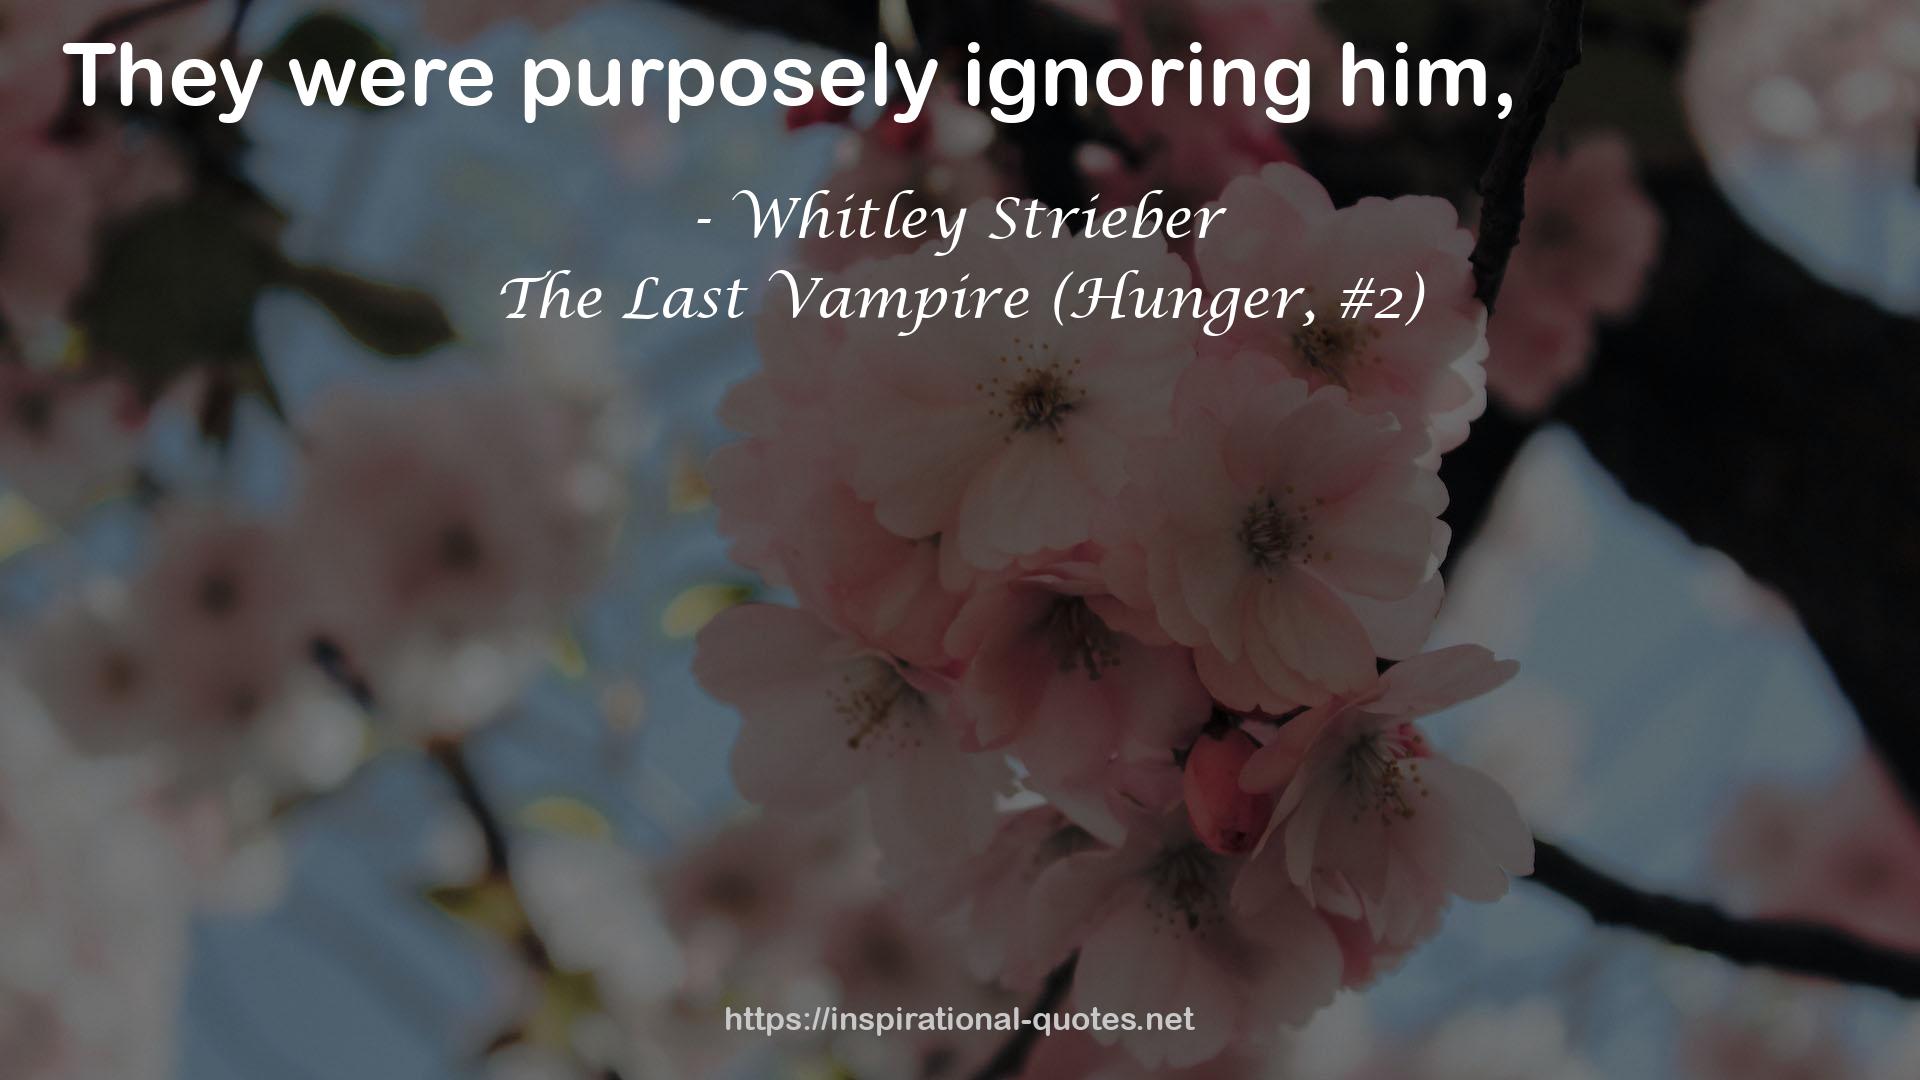 The Last Vampire (Hunger, #2) QUOTES